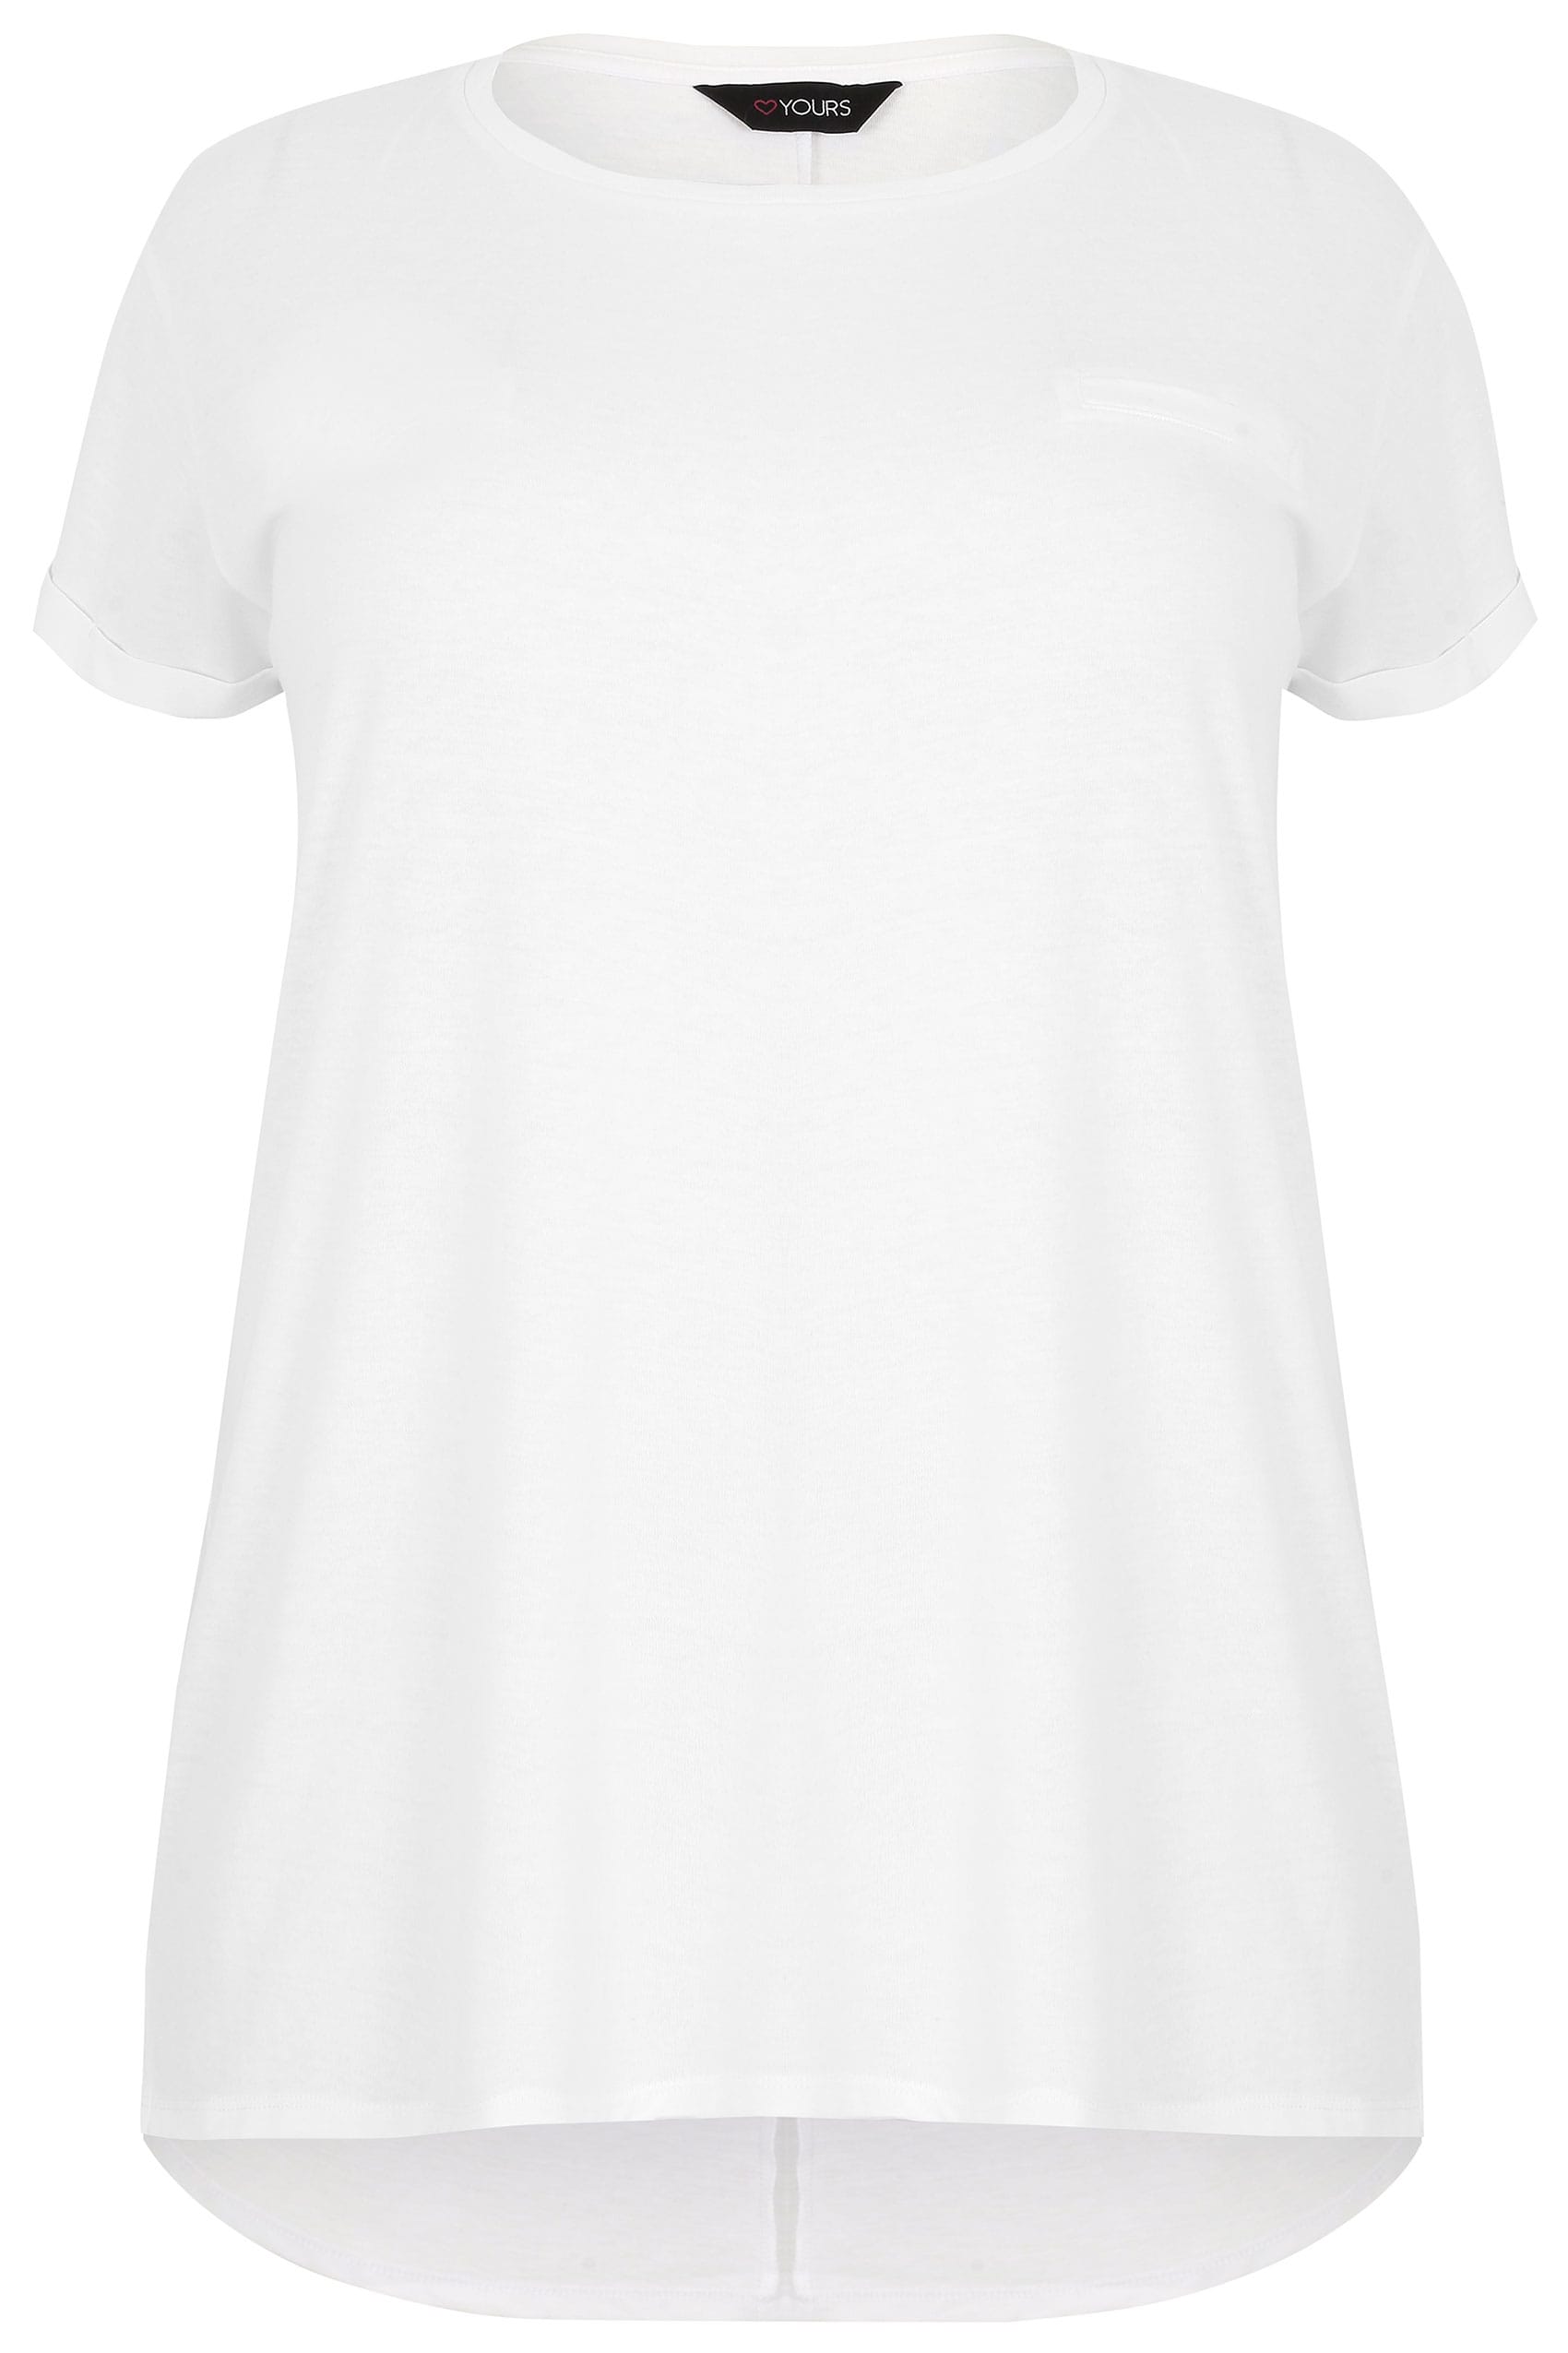 White Pocket T-Shirt With Curved Hem, Plus size 16 to 36